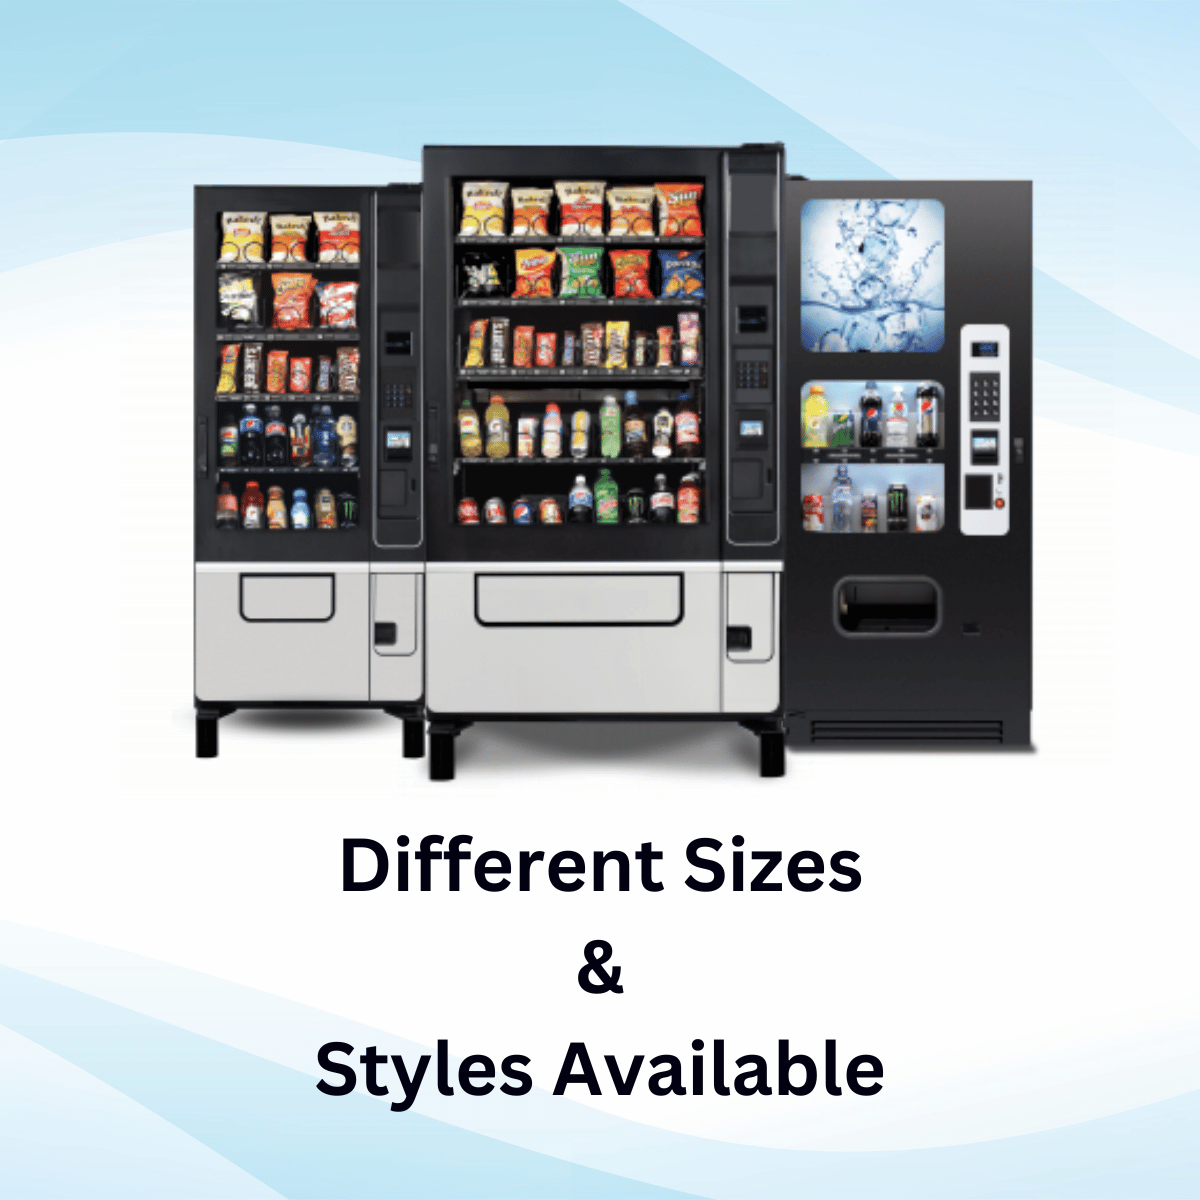 SNACK MACHINES COME IN ALL SIZES AND STYLES